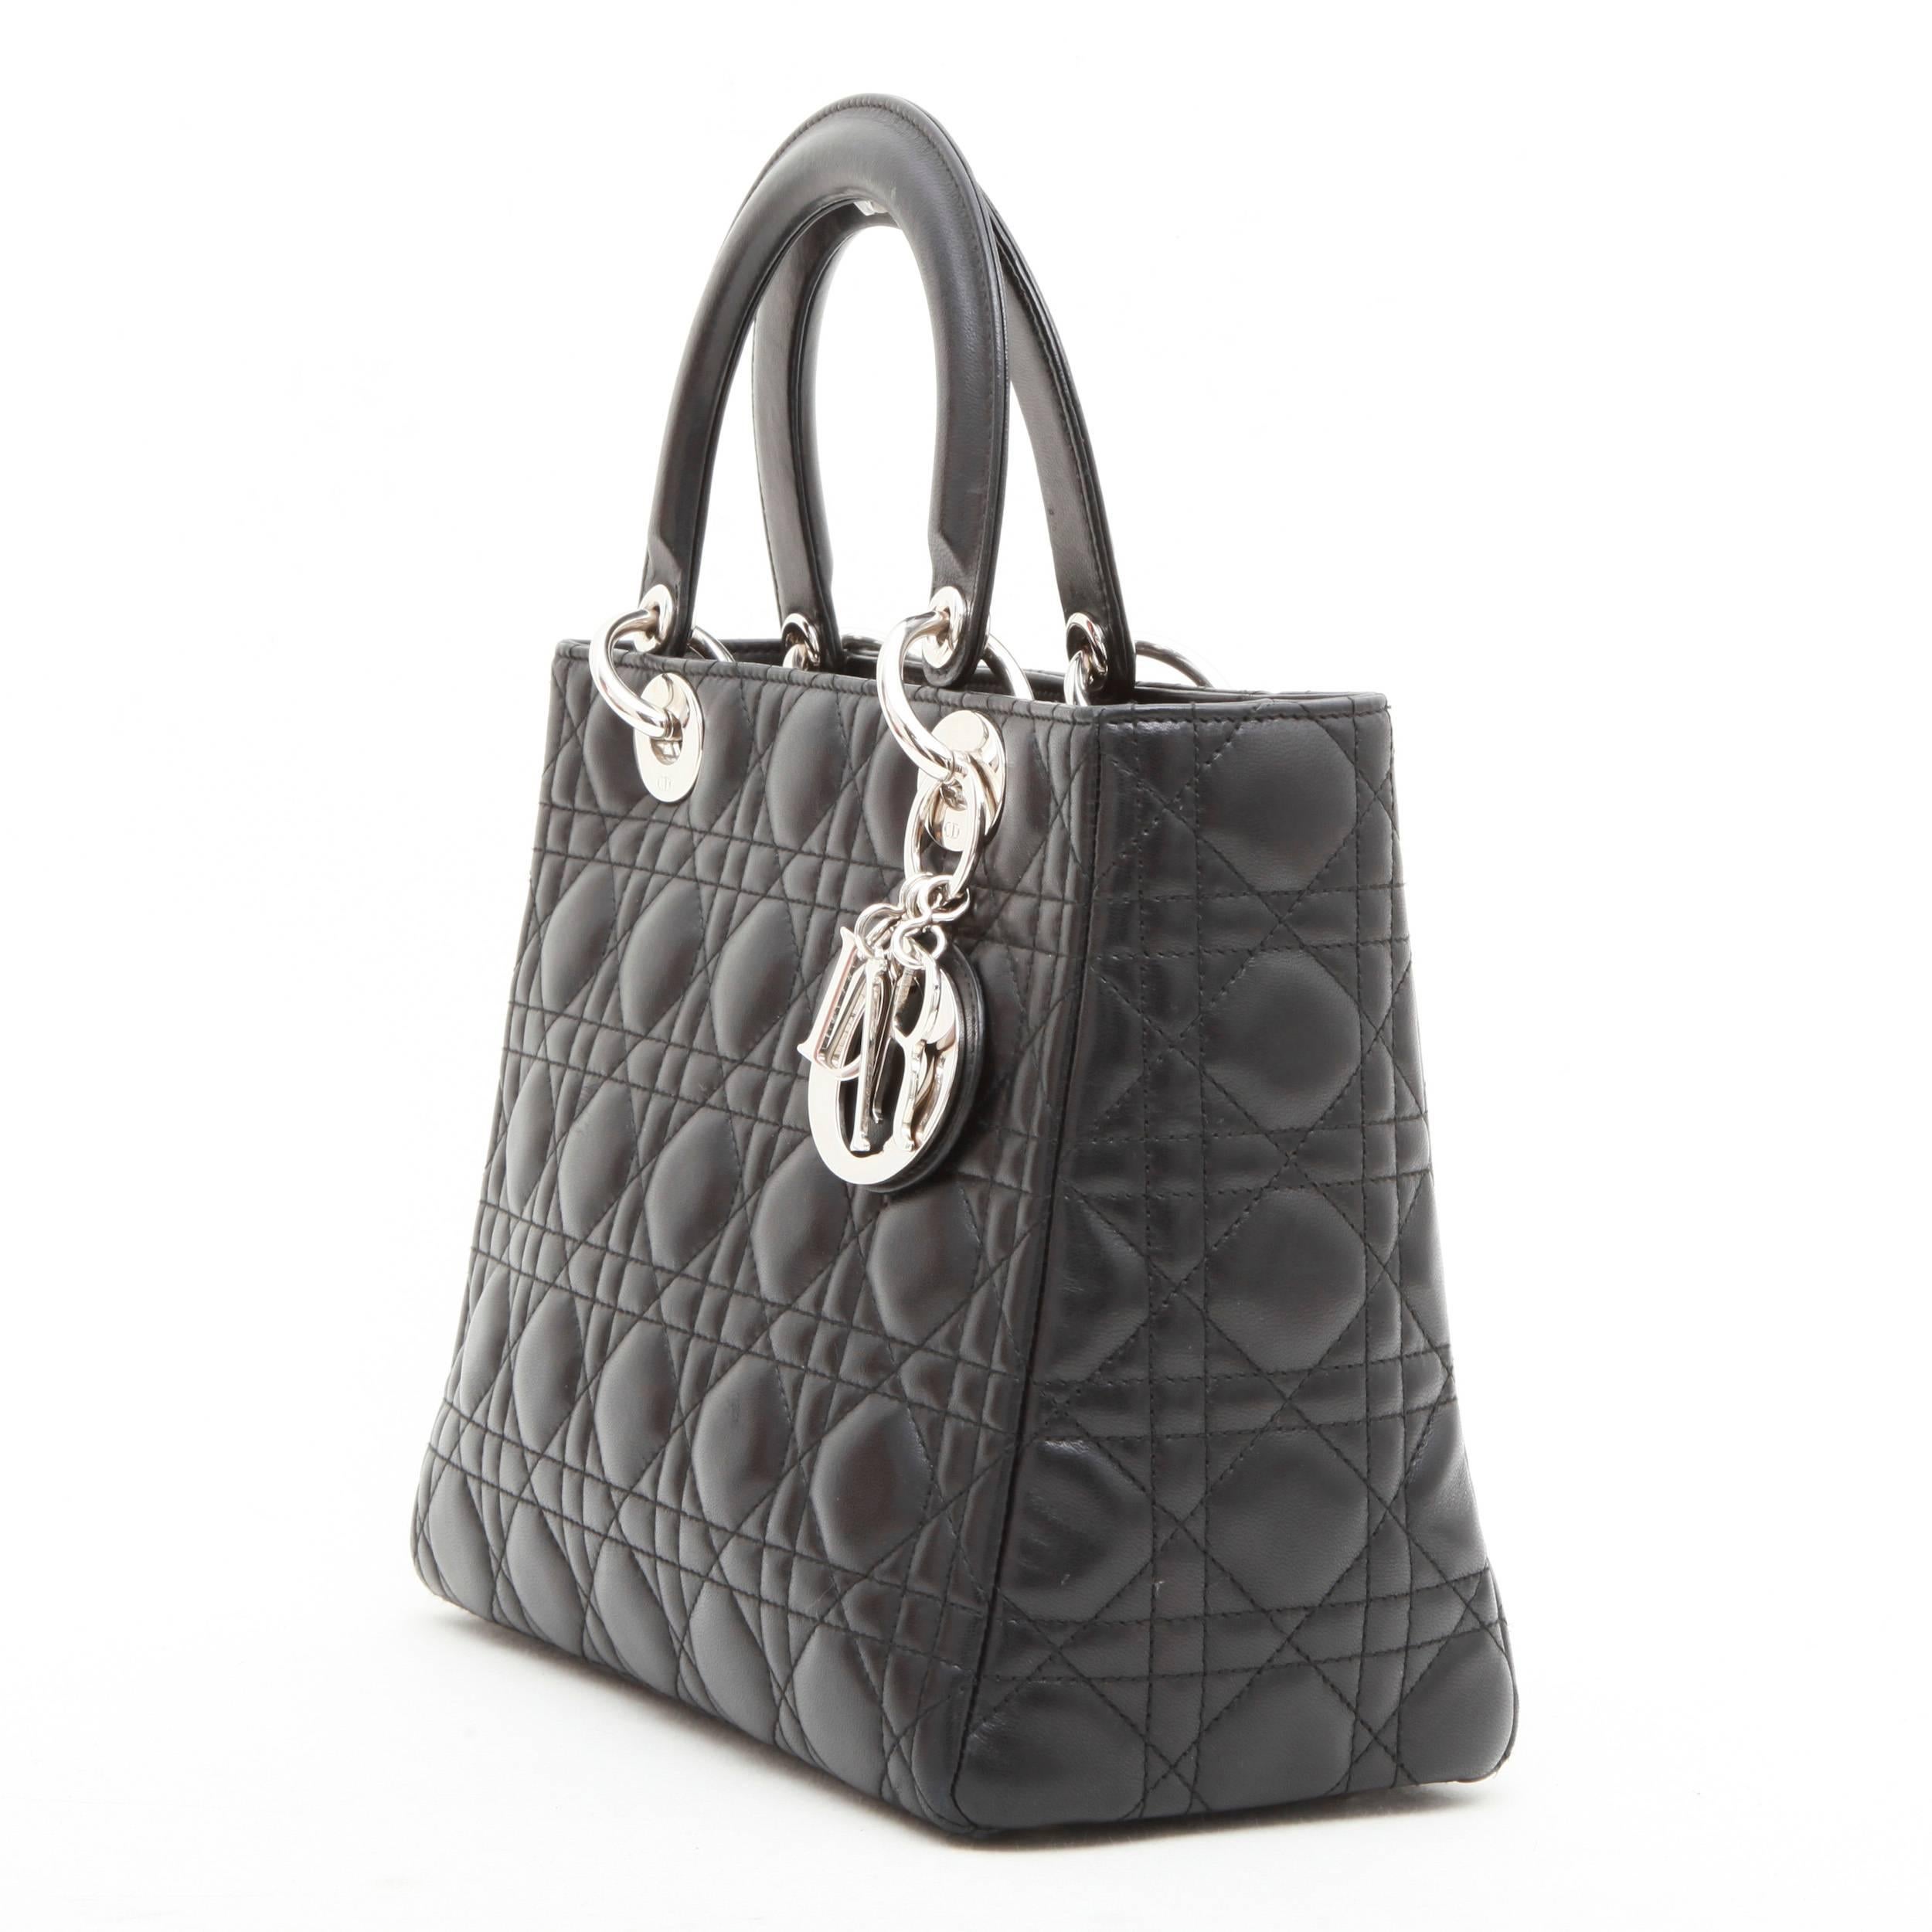 CHRISTIAN DIOR 'Lady Dior' Bag in Black Quilted Leather 6